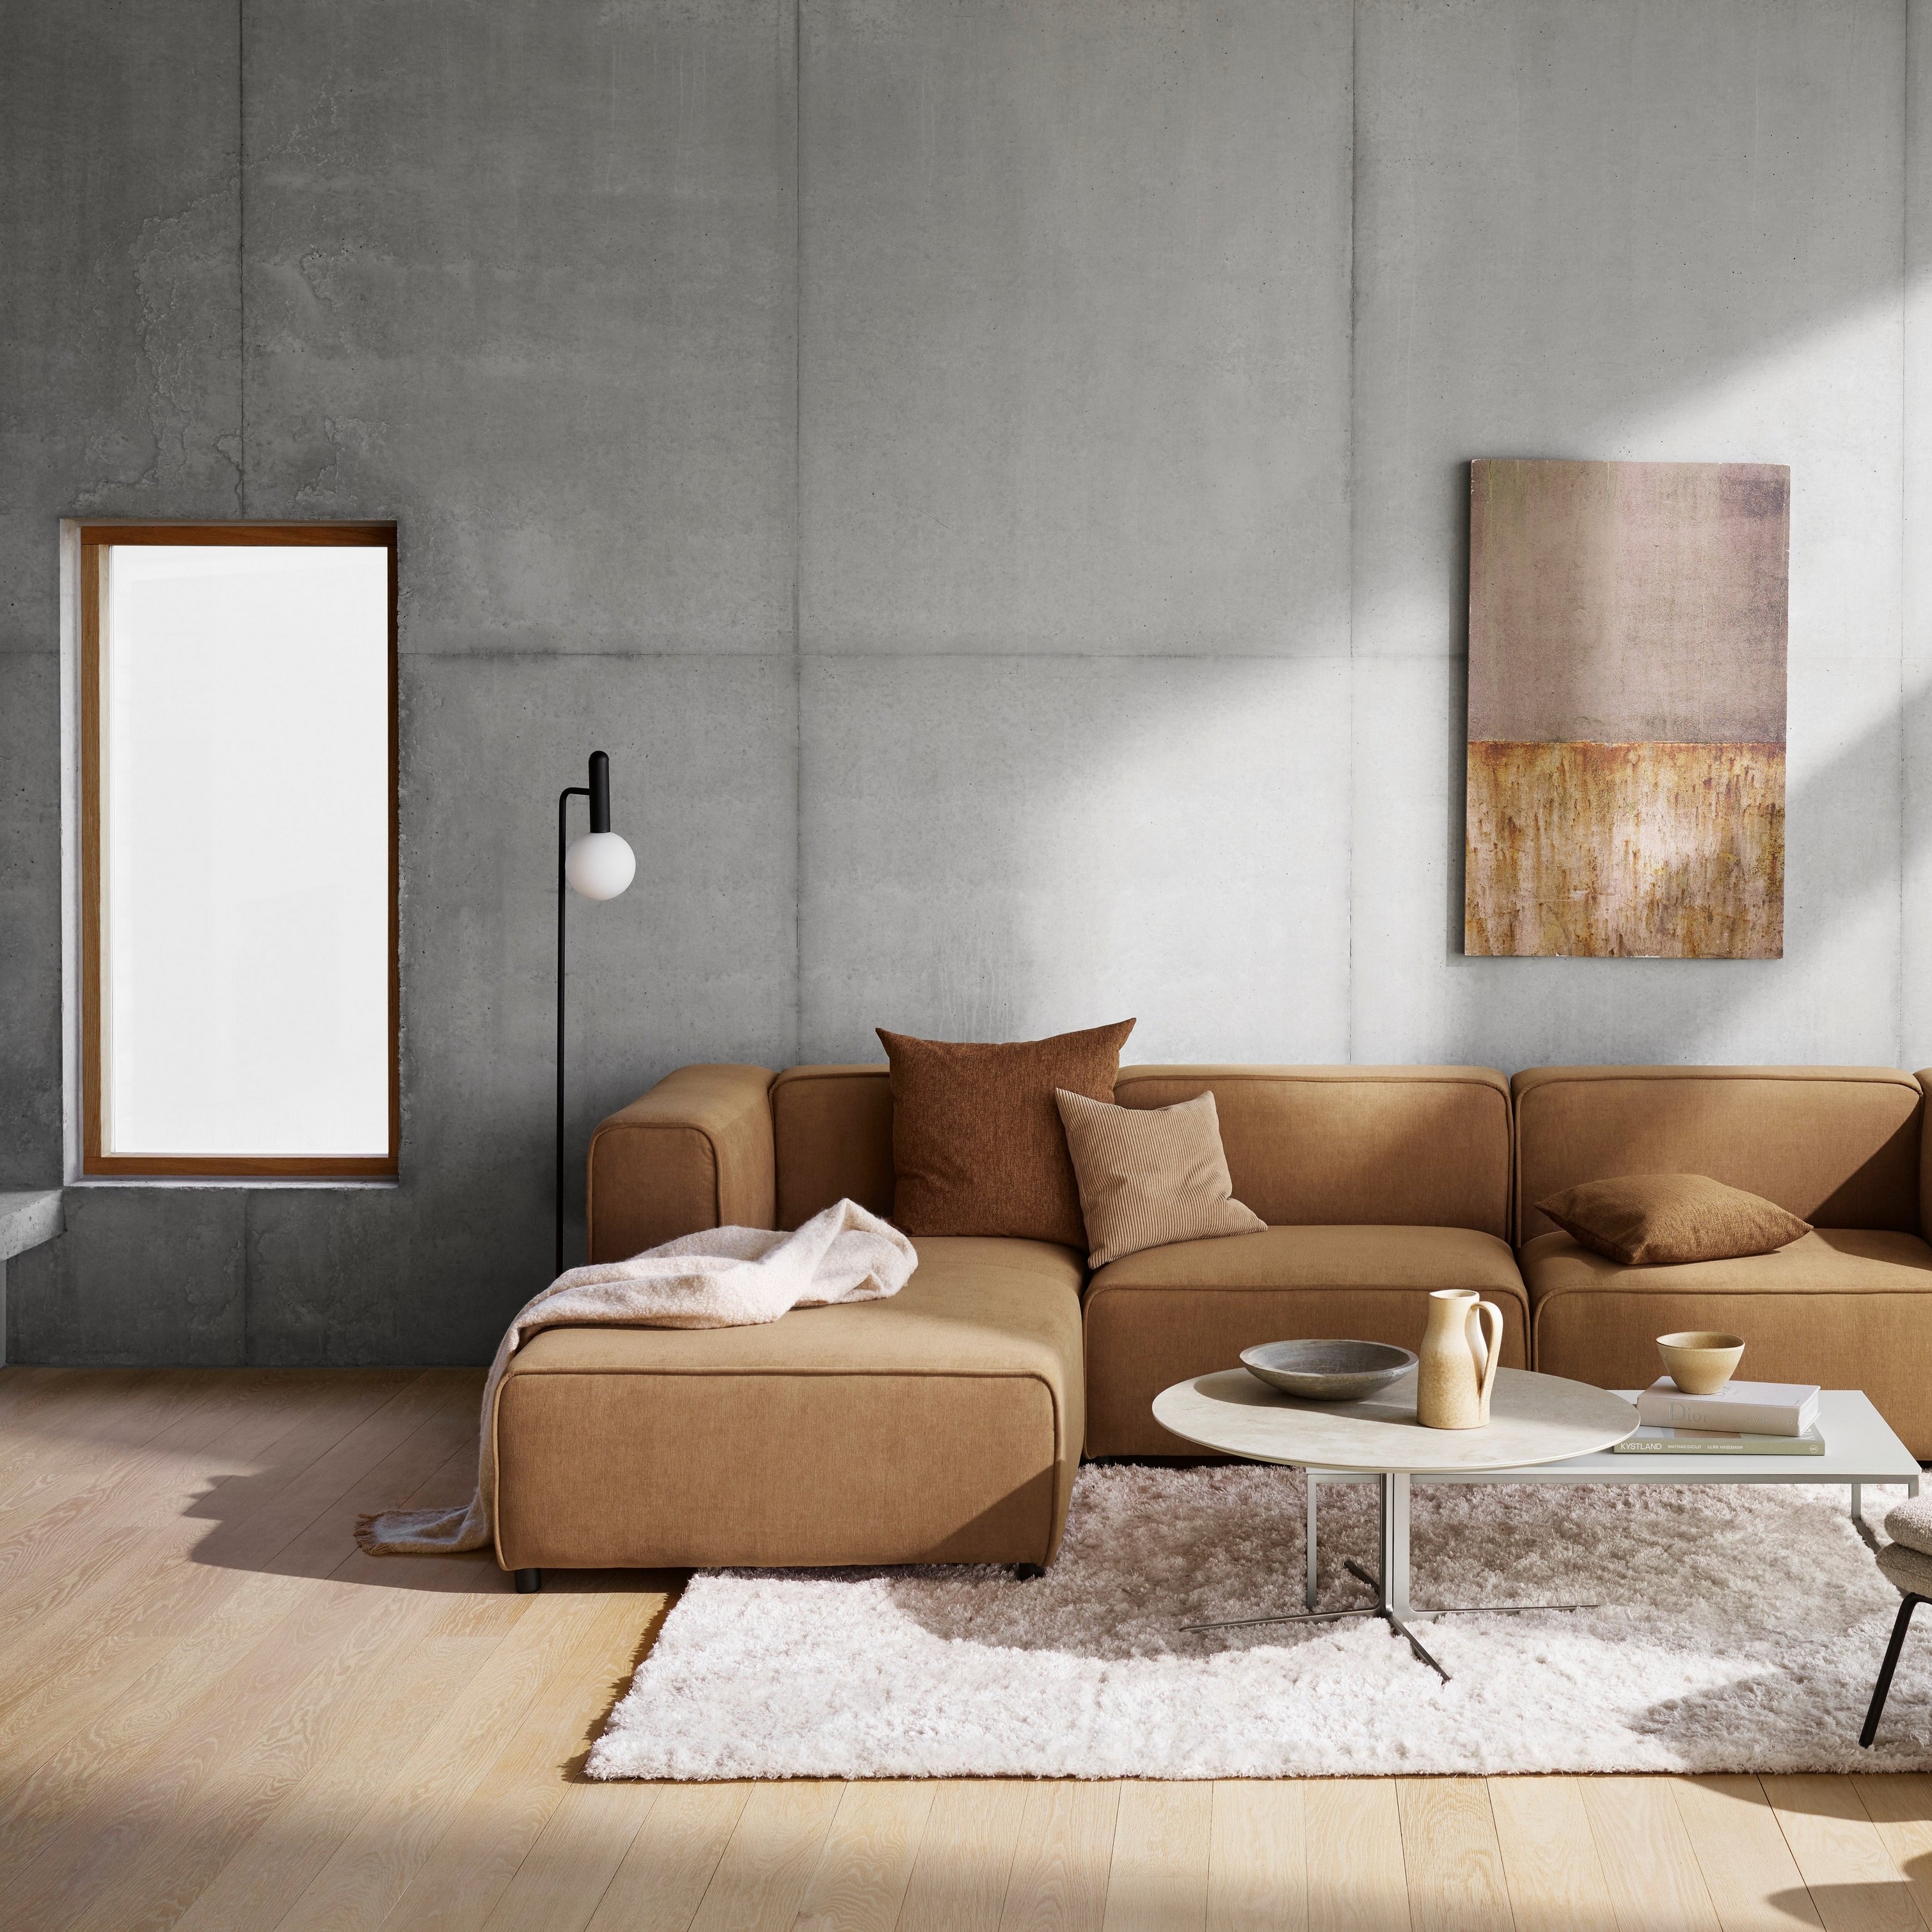 Modern living room with beige sectional sofa, abstract wall art, and plush rug on a wooden floor